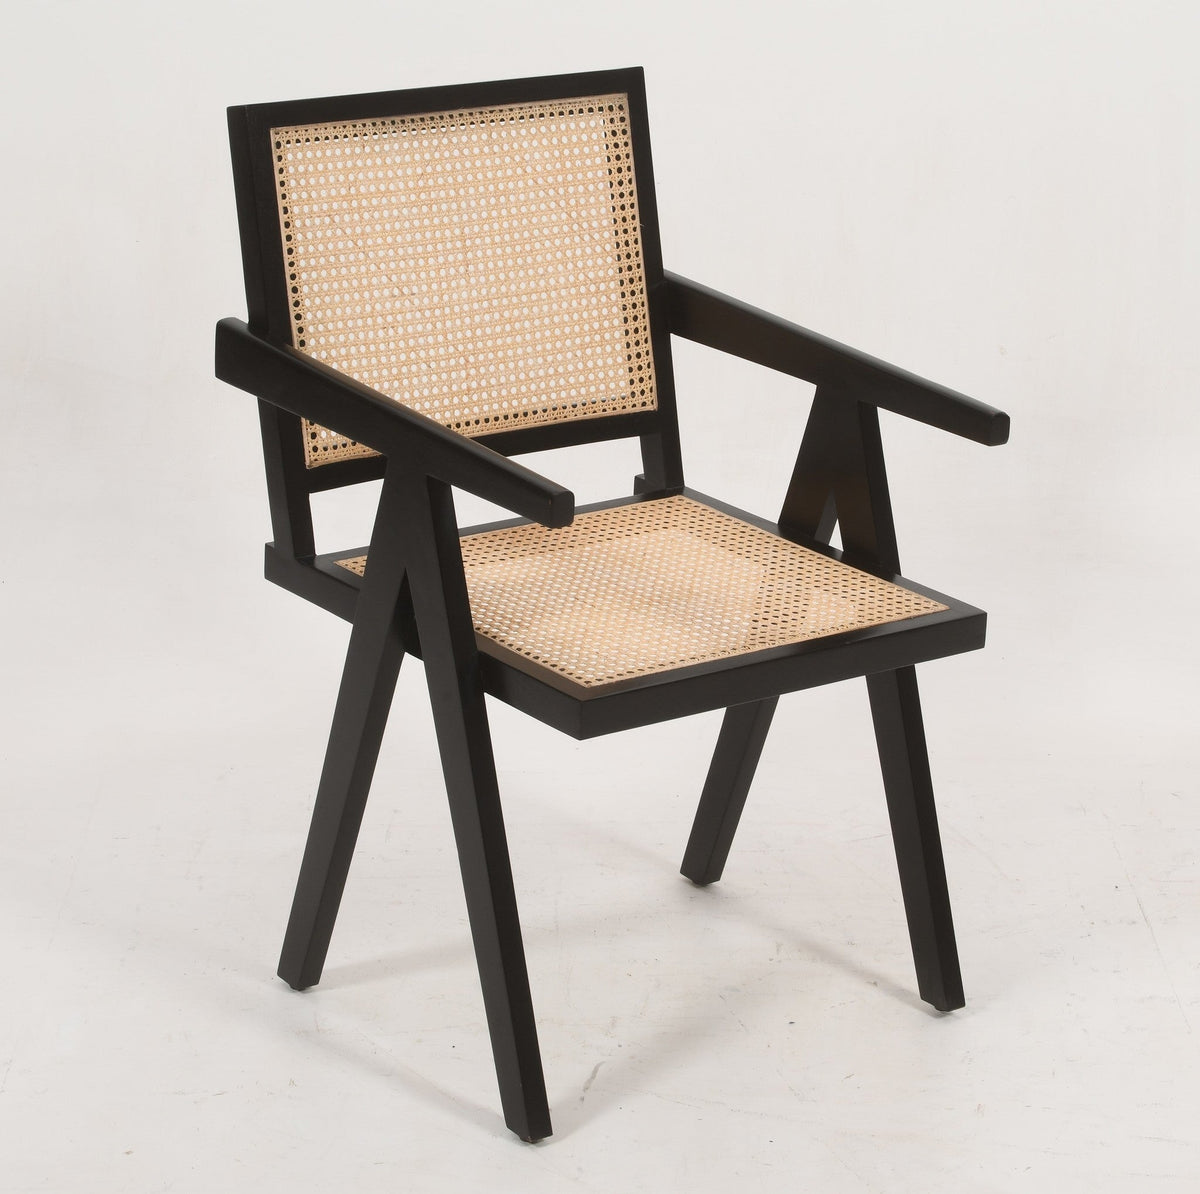 Pierre Jeanneret Solid Acacia Wood Dining Chair with Armrest | Black &amp; Cane Dining Chair Casa Maria Designs 